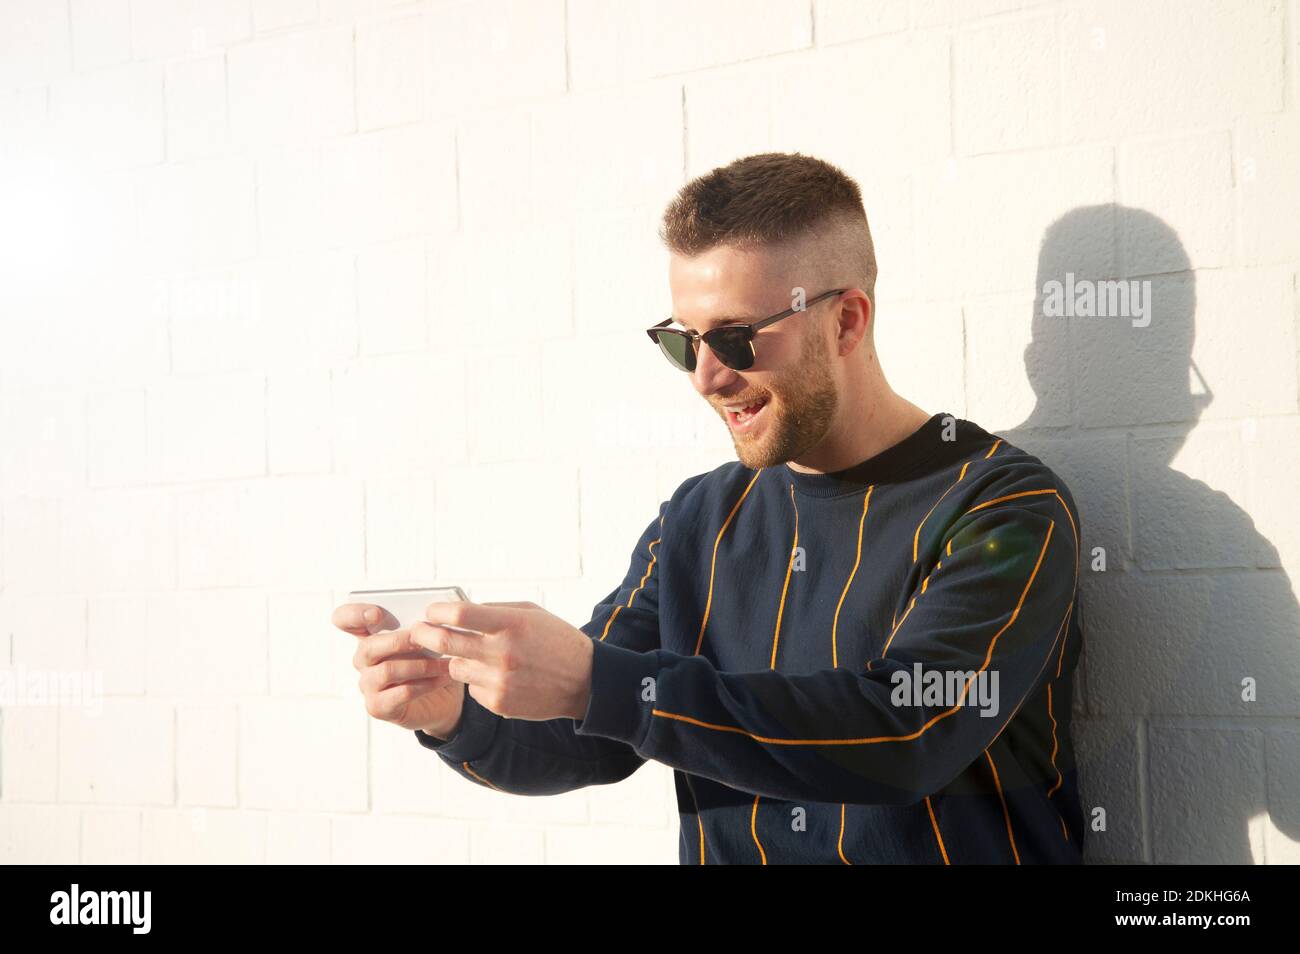 Positive smiling guy in casualwear with mobile phone. Young caucasian man standing at outdoor white wall and see funny videos in his device. Leisure, fun concept. Stock Photo